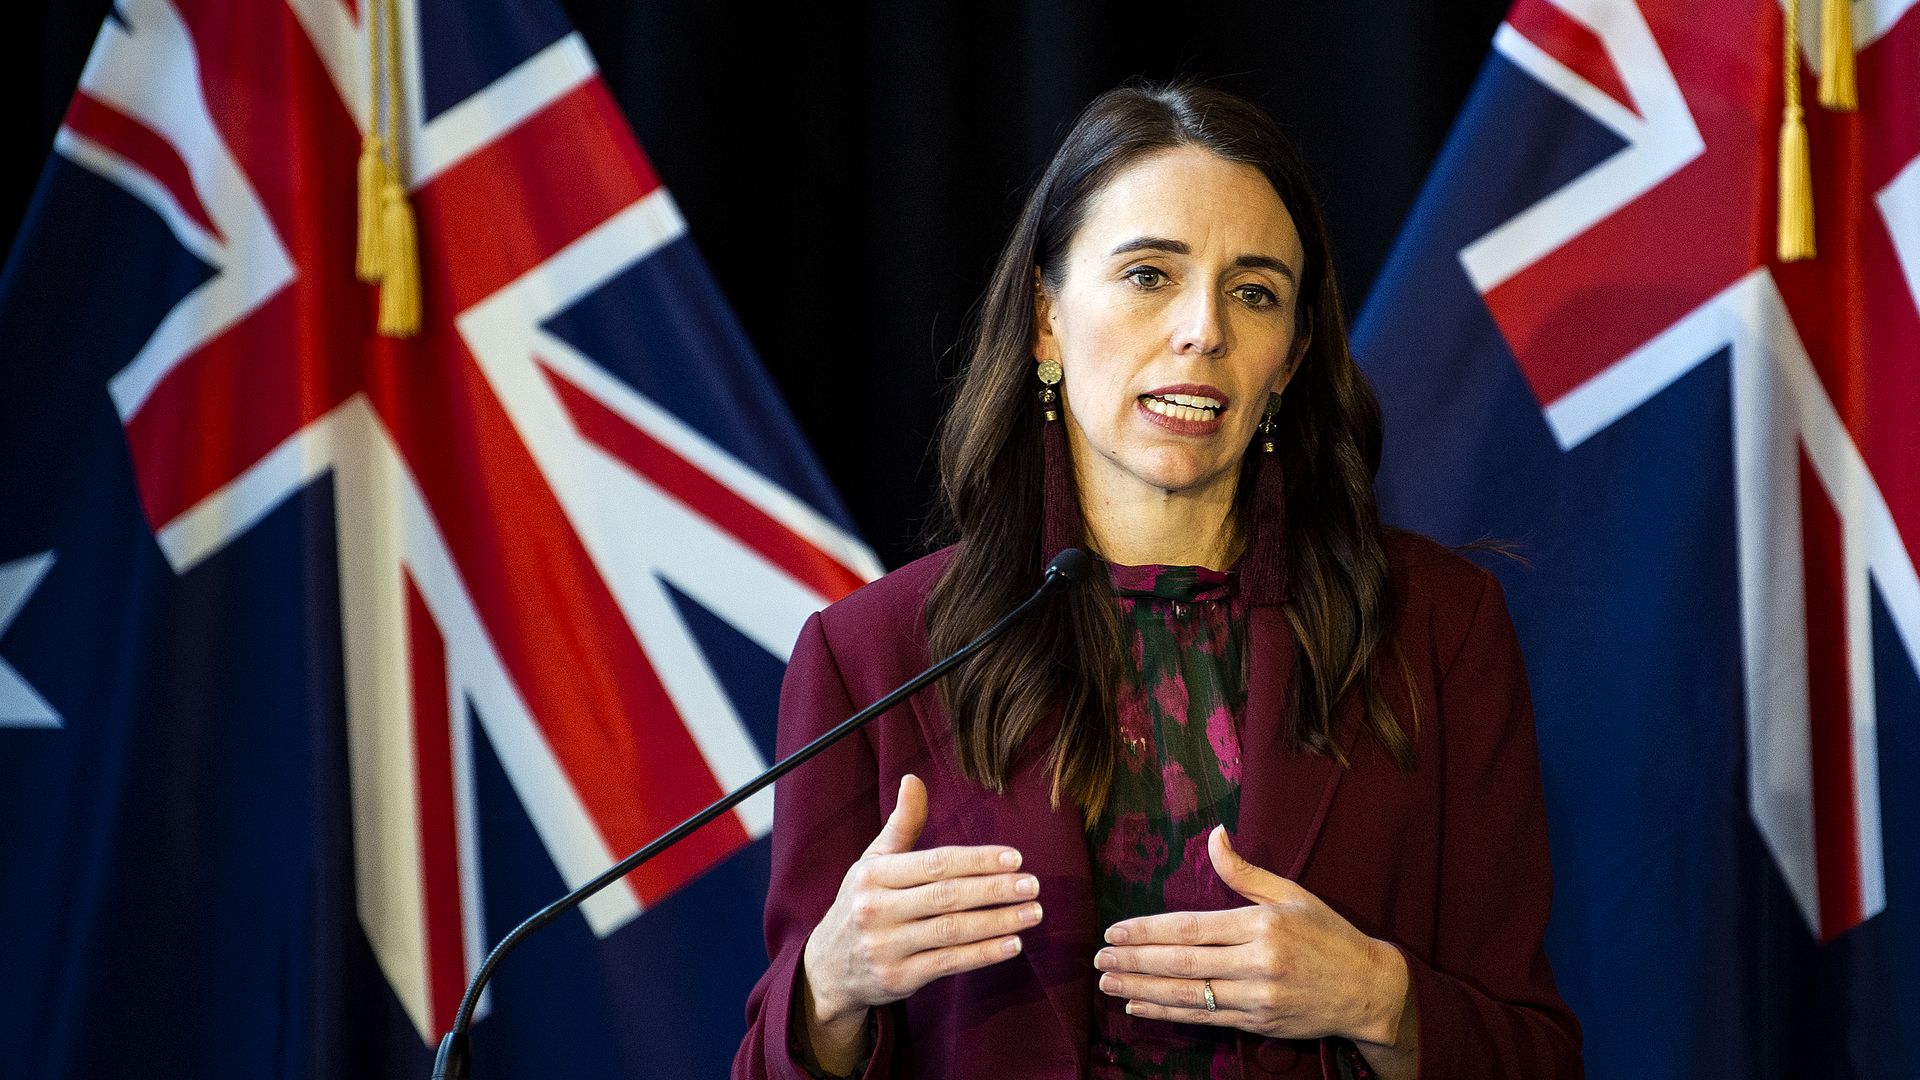 New Zealand Prime Minister Jacinda Ardern answers questions from the media on May 31, 2021 in Queenstown, New Zealand. 